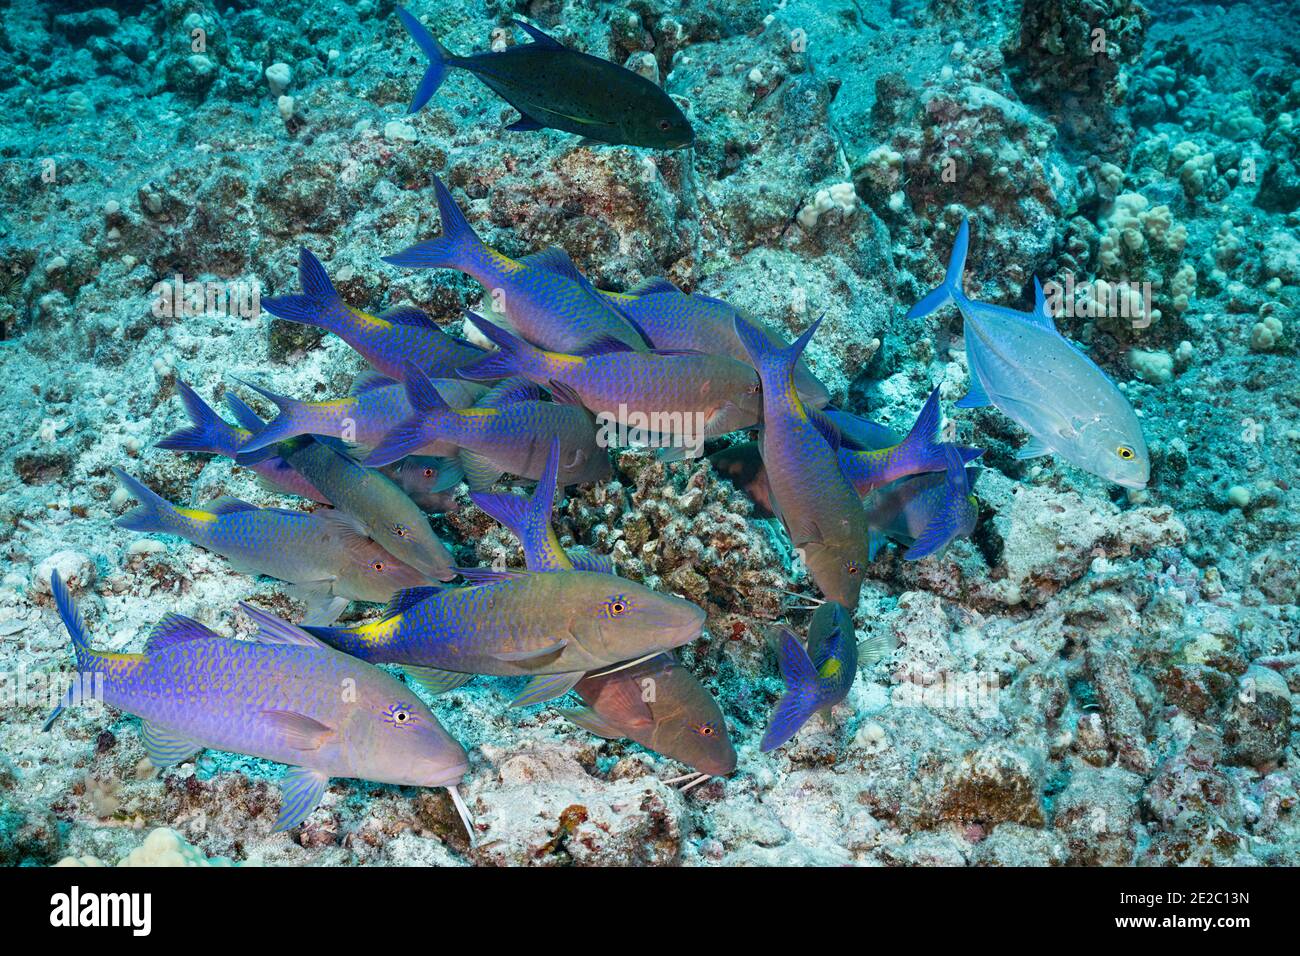 Hunting coalition of blue goatfish and bluefin jacks; One jack has adopted a dark color phase, which may indicate aggression or territoriality; Hawaii Stock Photo